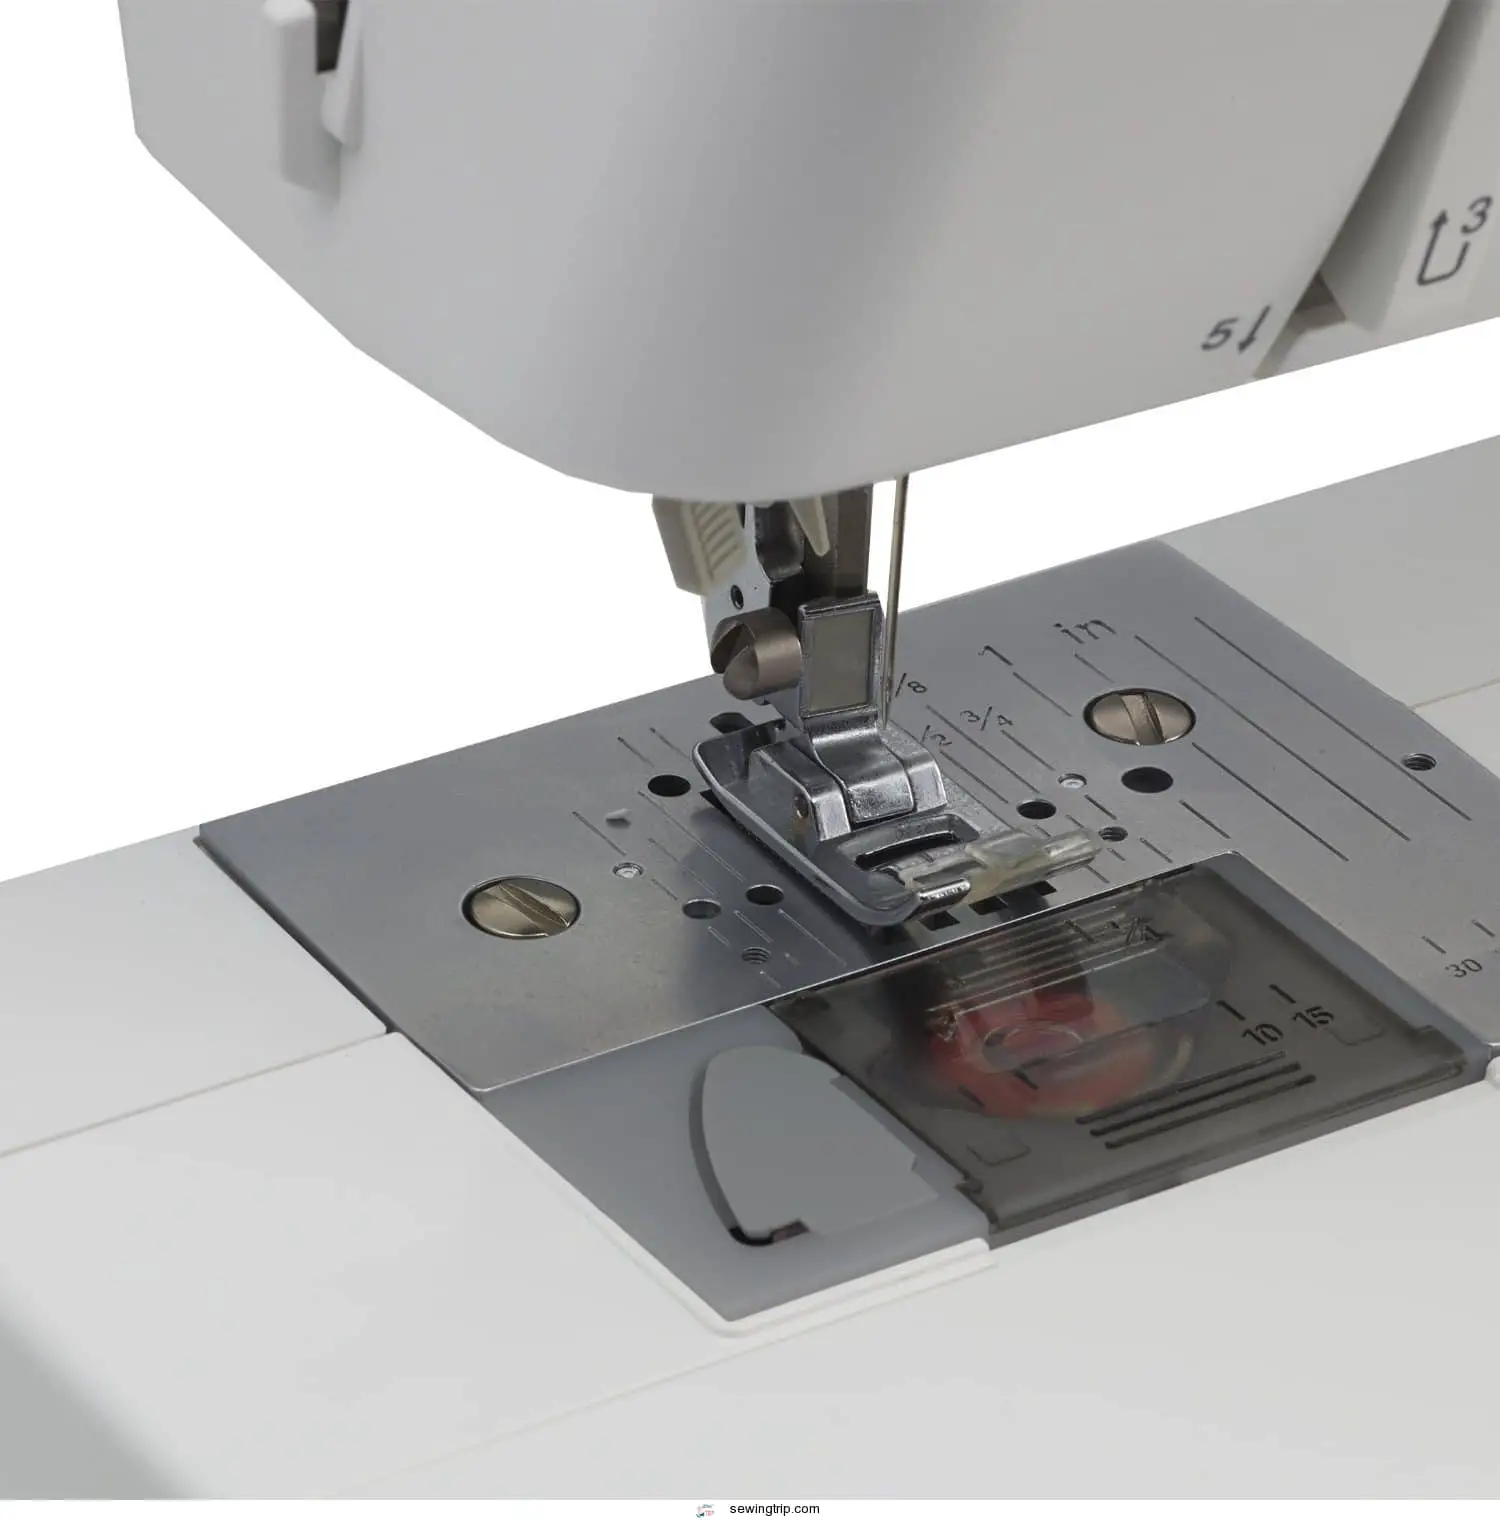 brother st371hd sewing machine